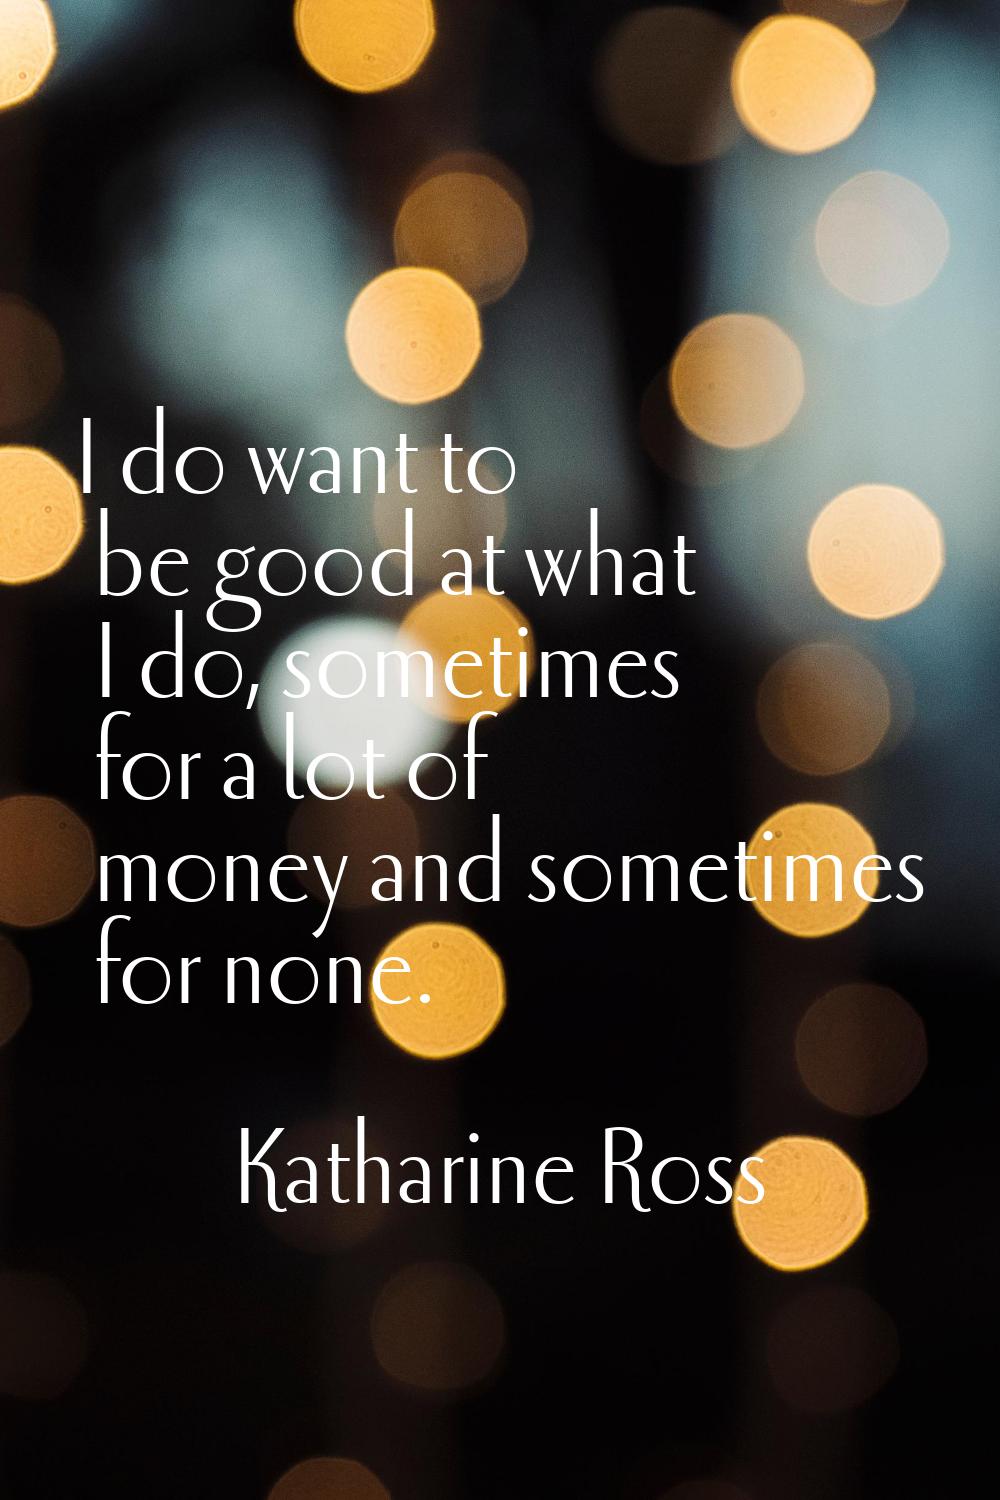 I do want to be good at what I do, sometimes for a lot of money and sometimes for none.